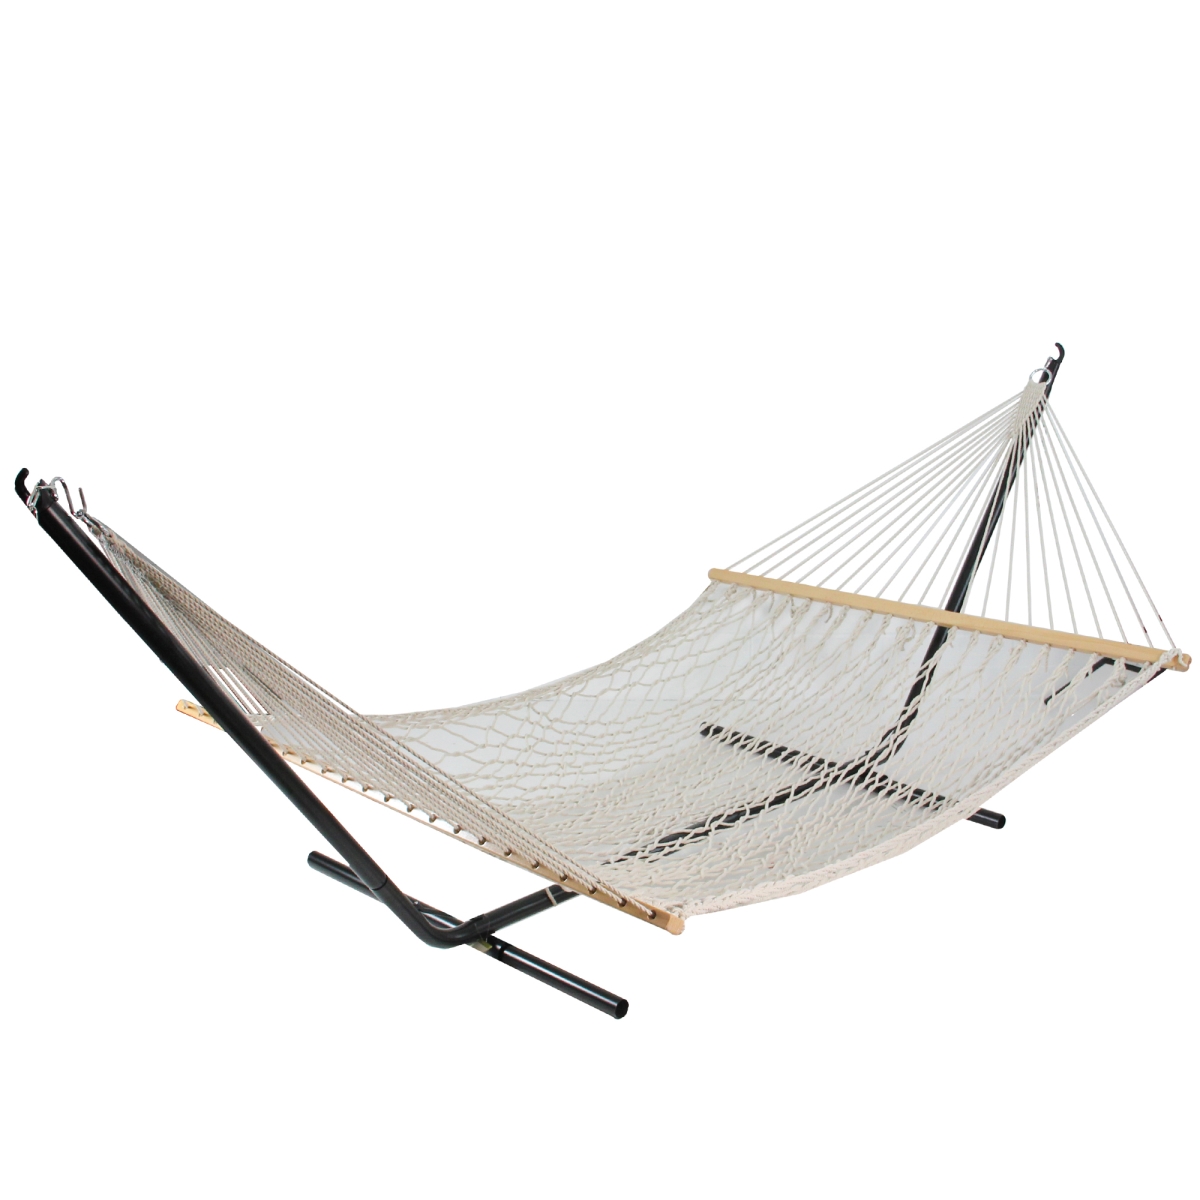 32756898 55 X 78 In. Lattice Pattern Netted Hammock With Wooden Bars, Tan